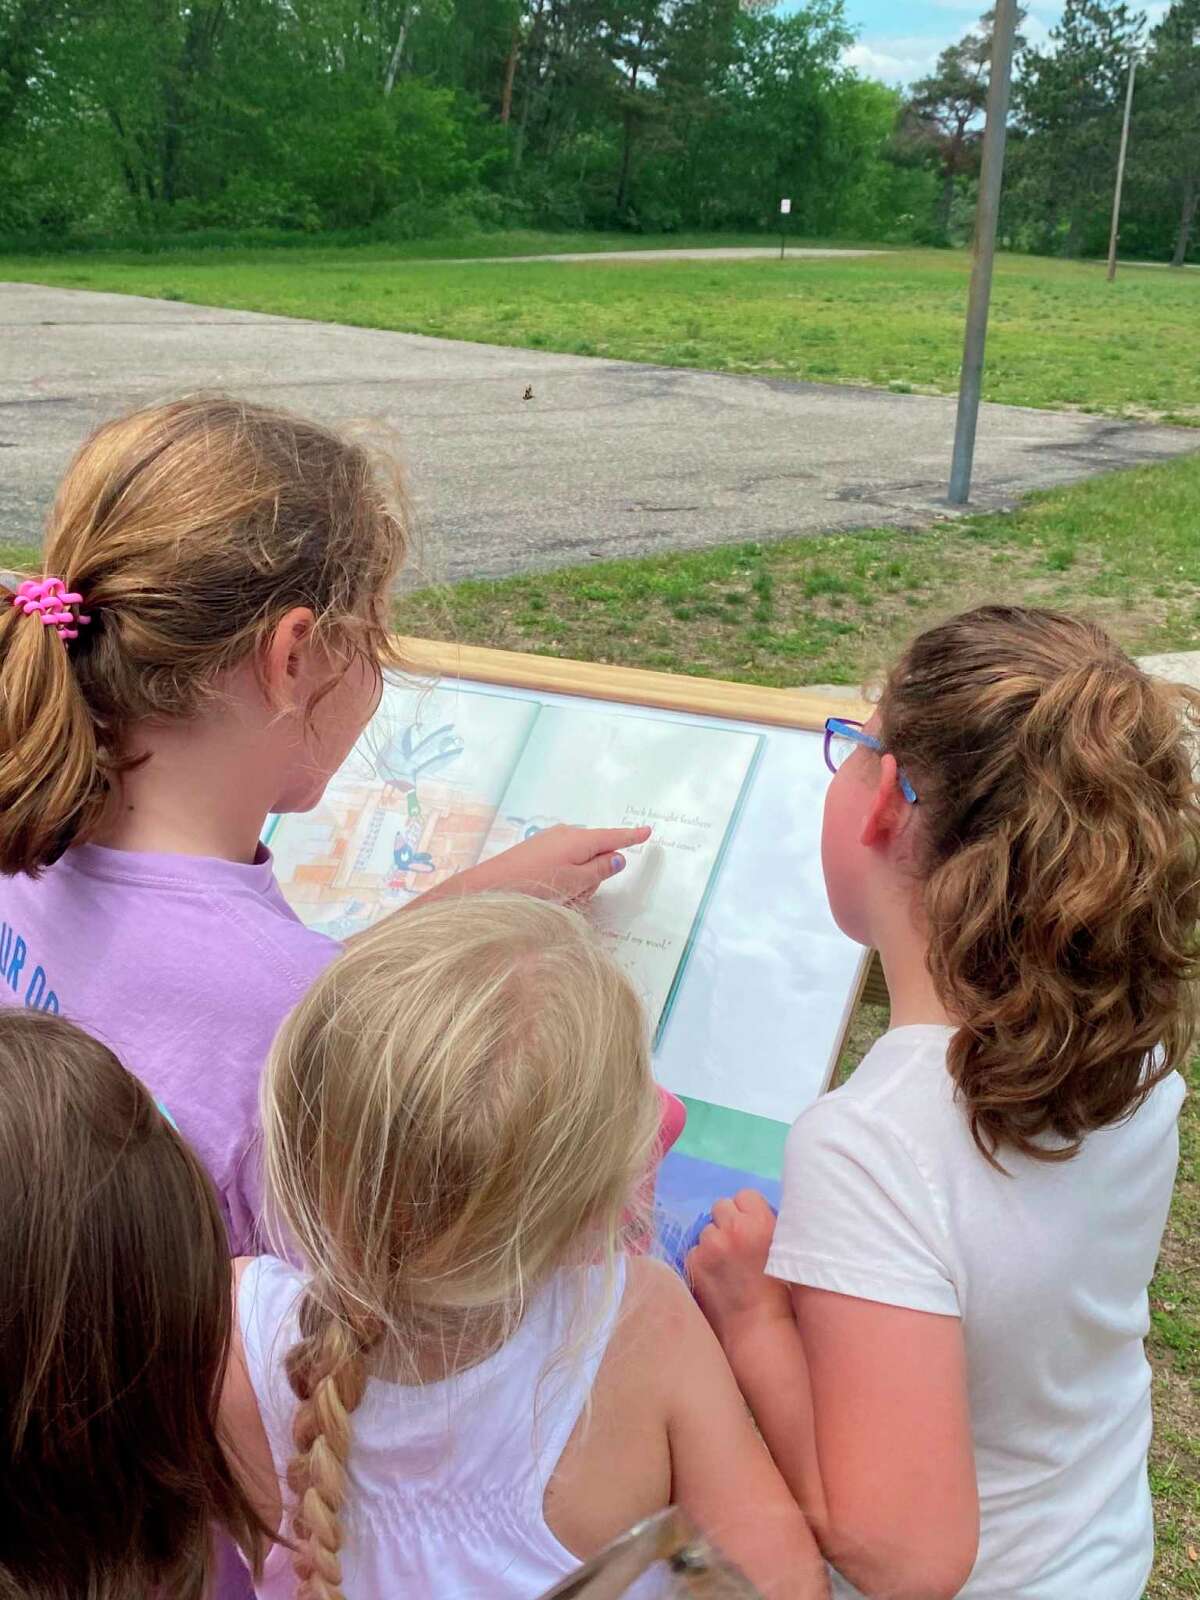 Kylene Nix, a Reed City teacher who also serves as treasurer with the RCADL, had her first-grade class from G.T. Norman Schools visit the StoryWalk in Westburg Park. (Courtesy/Kylene Nix)